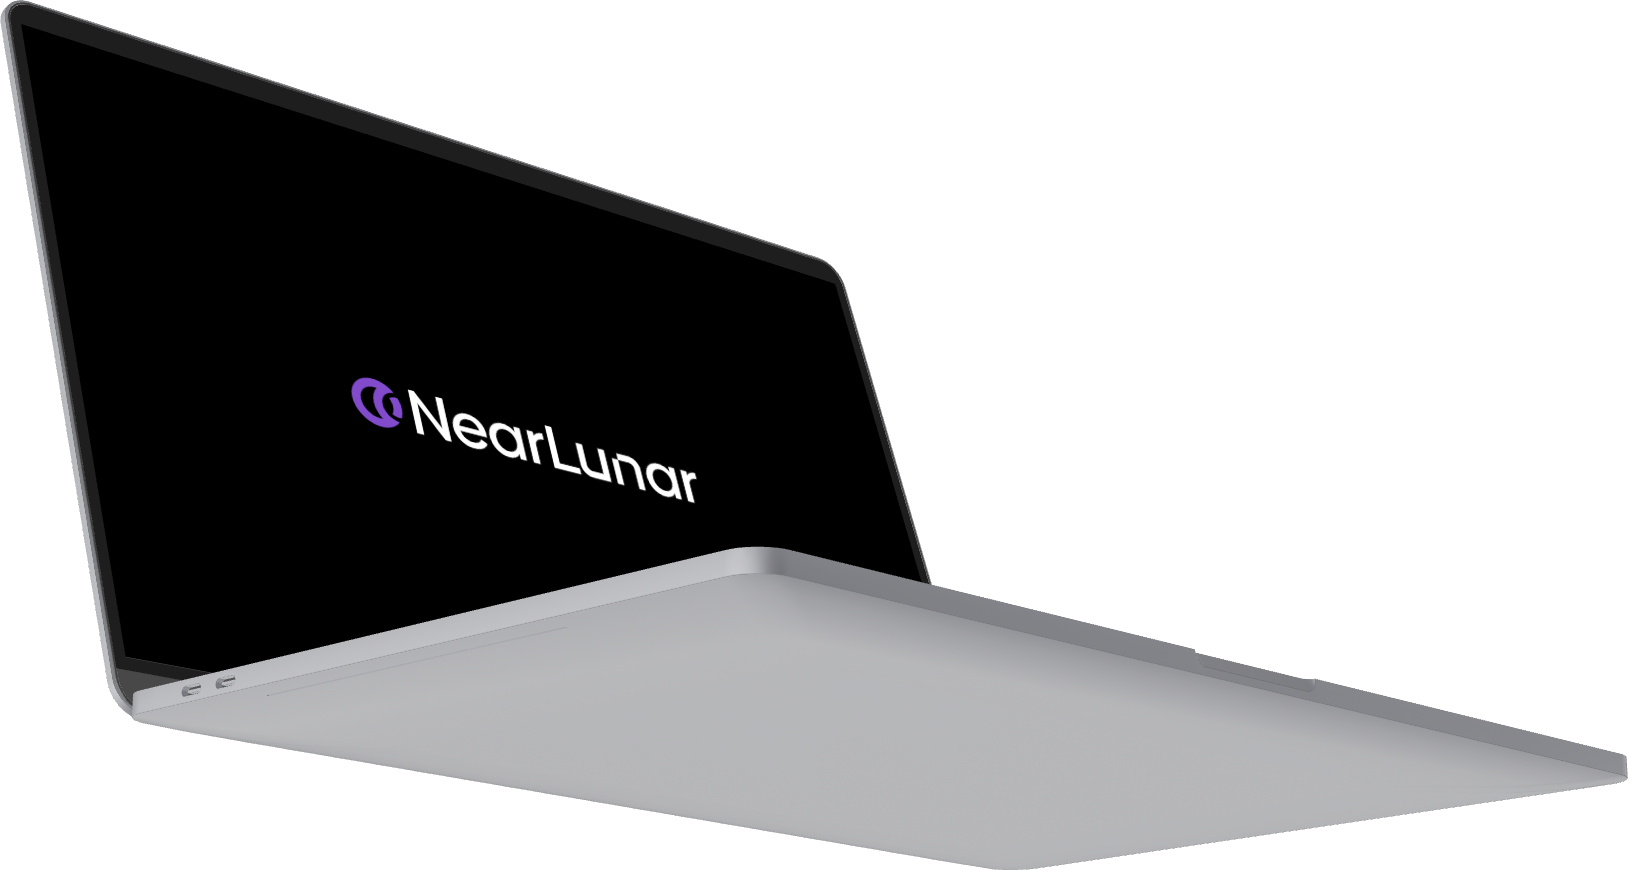 A Laptop with the NearLunar Logo on the Screen